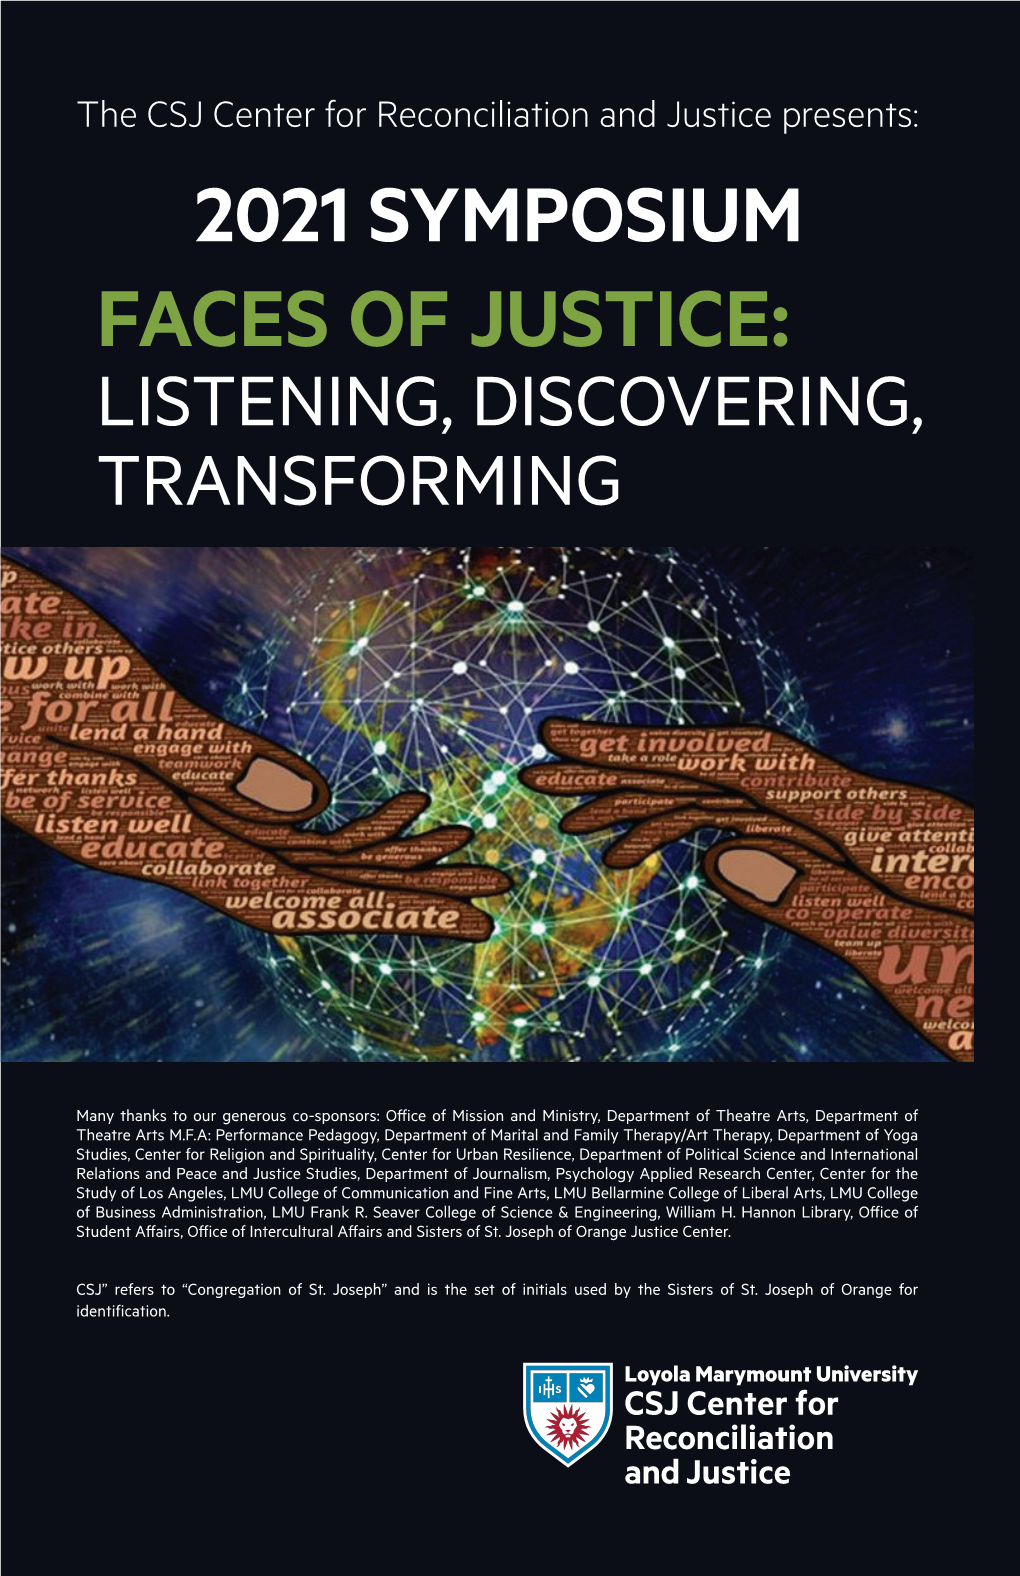 Faces of Justice: Listening, Discovering, Transforming